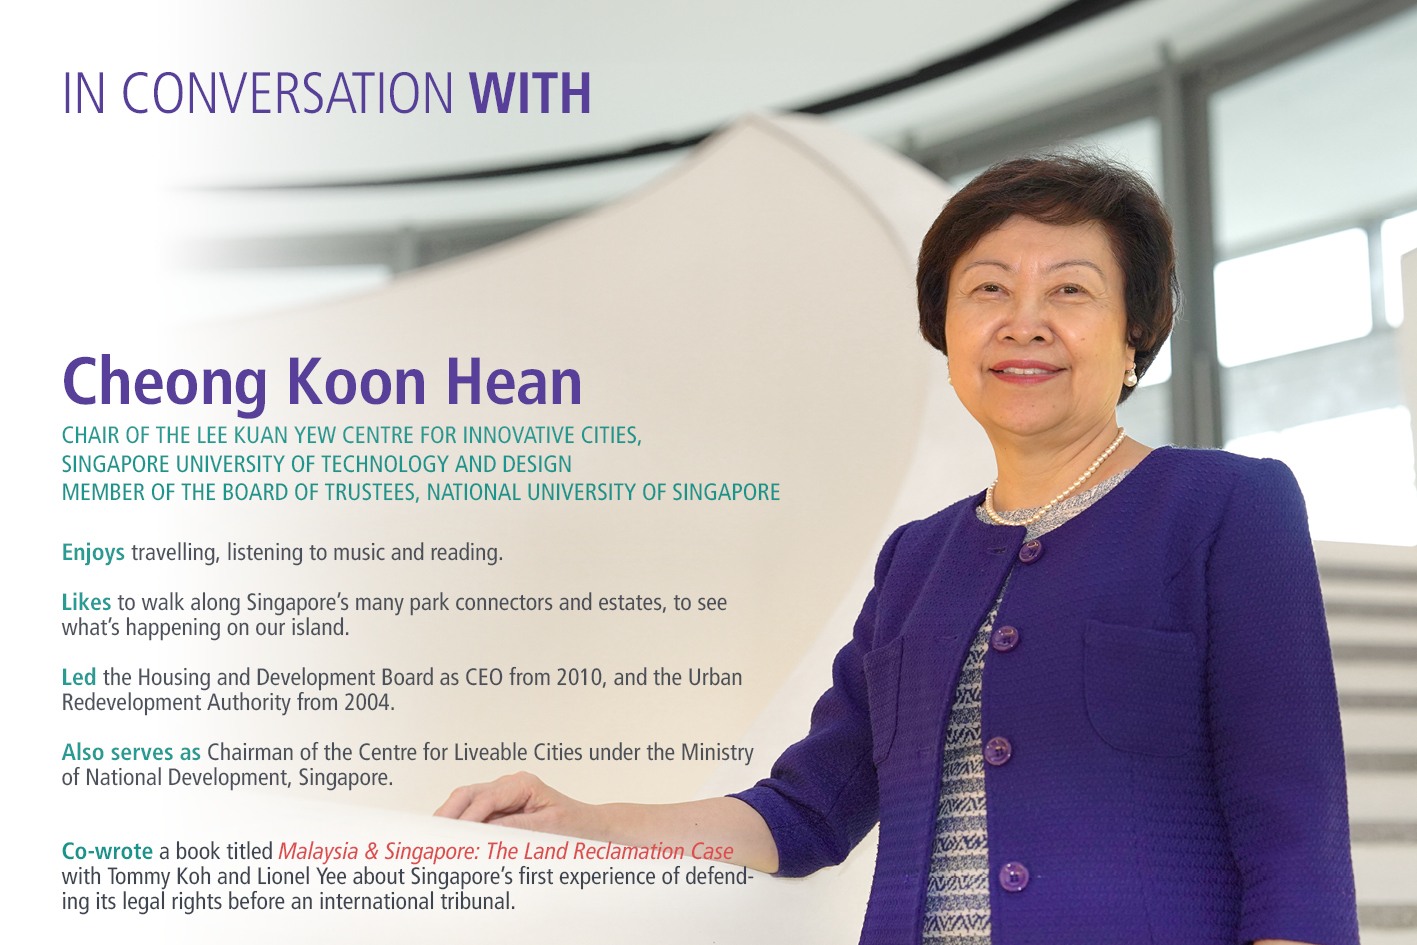 An infographic on Prof Cheong Koon Hean